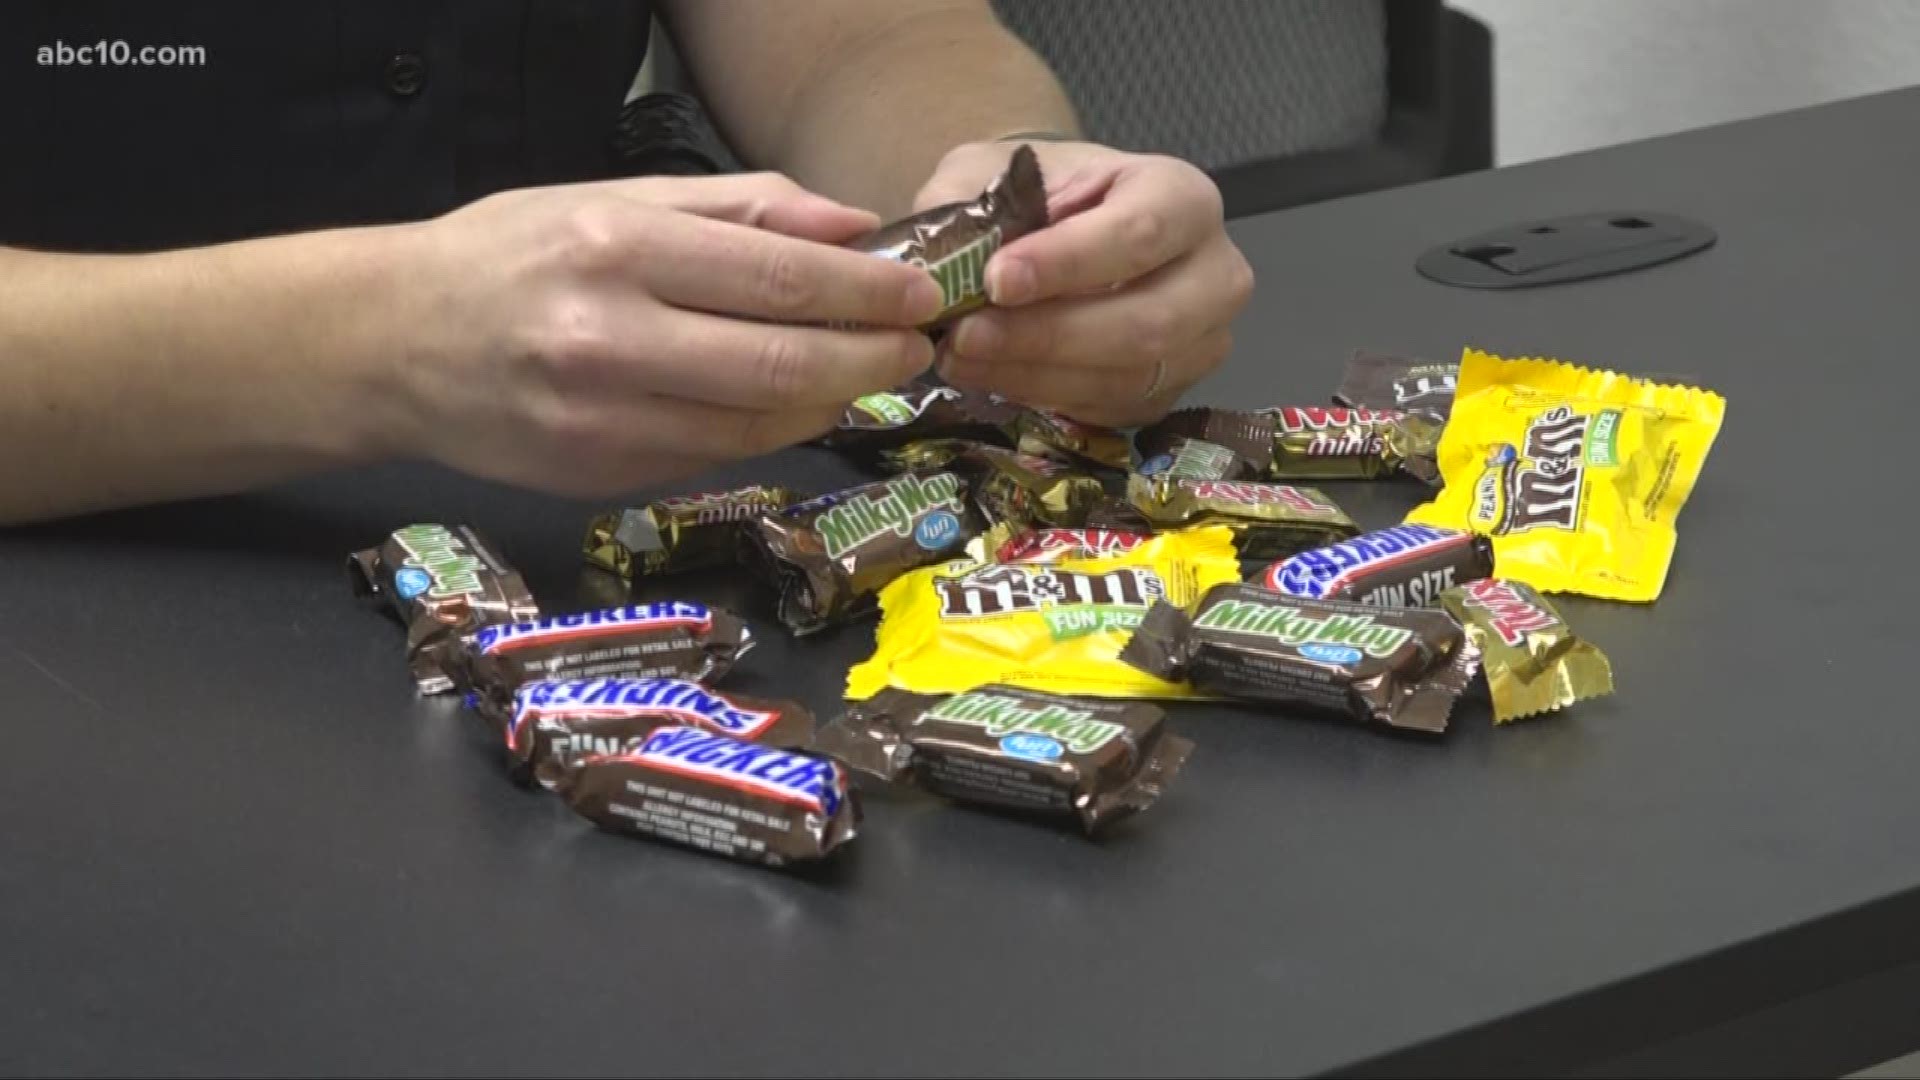 One year after a candy tampering incident turned into a hoax, Oakdale police warn parents to inspect their child's candy after trick-or-treating this Halloween.